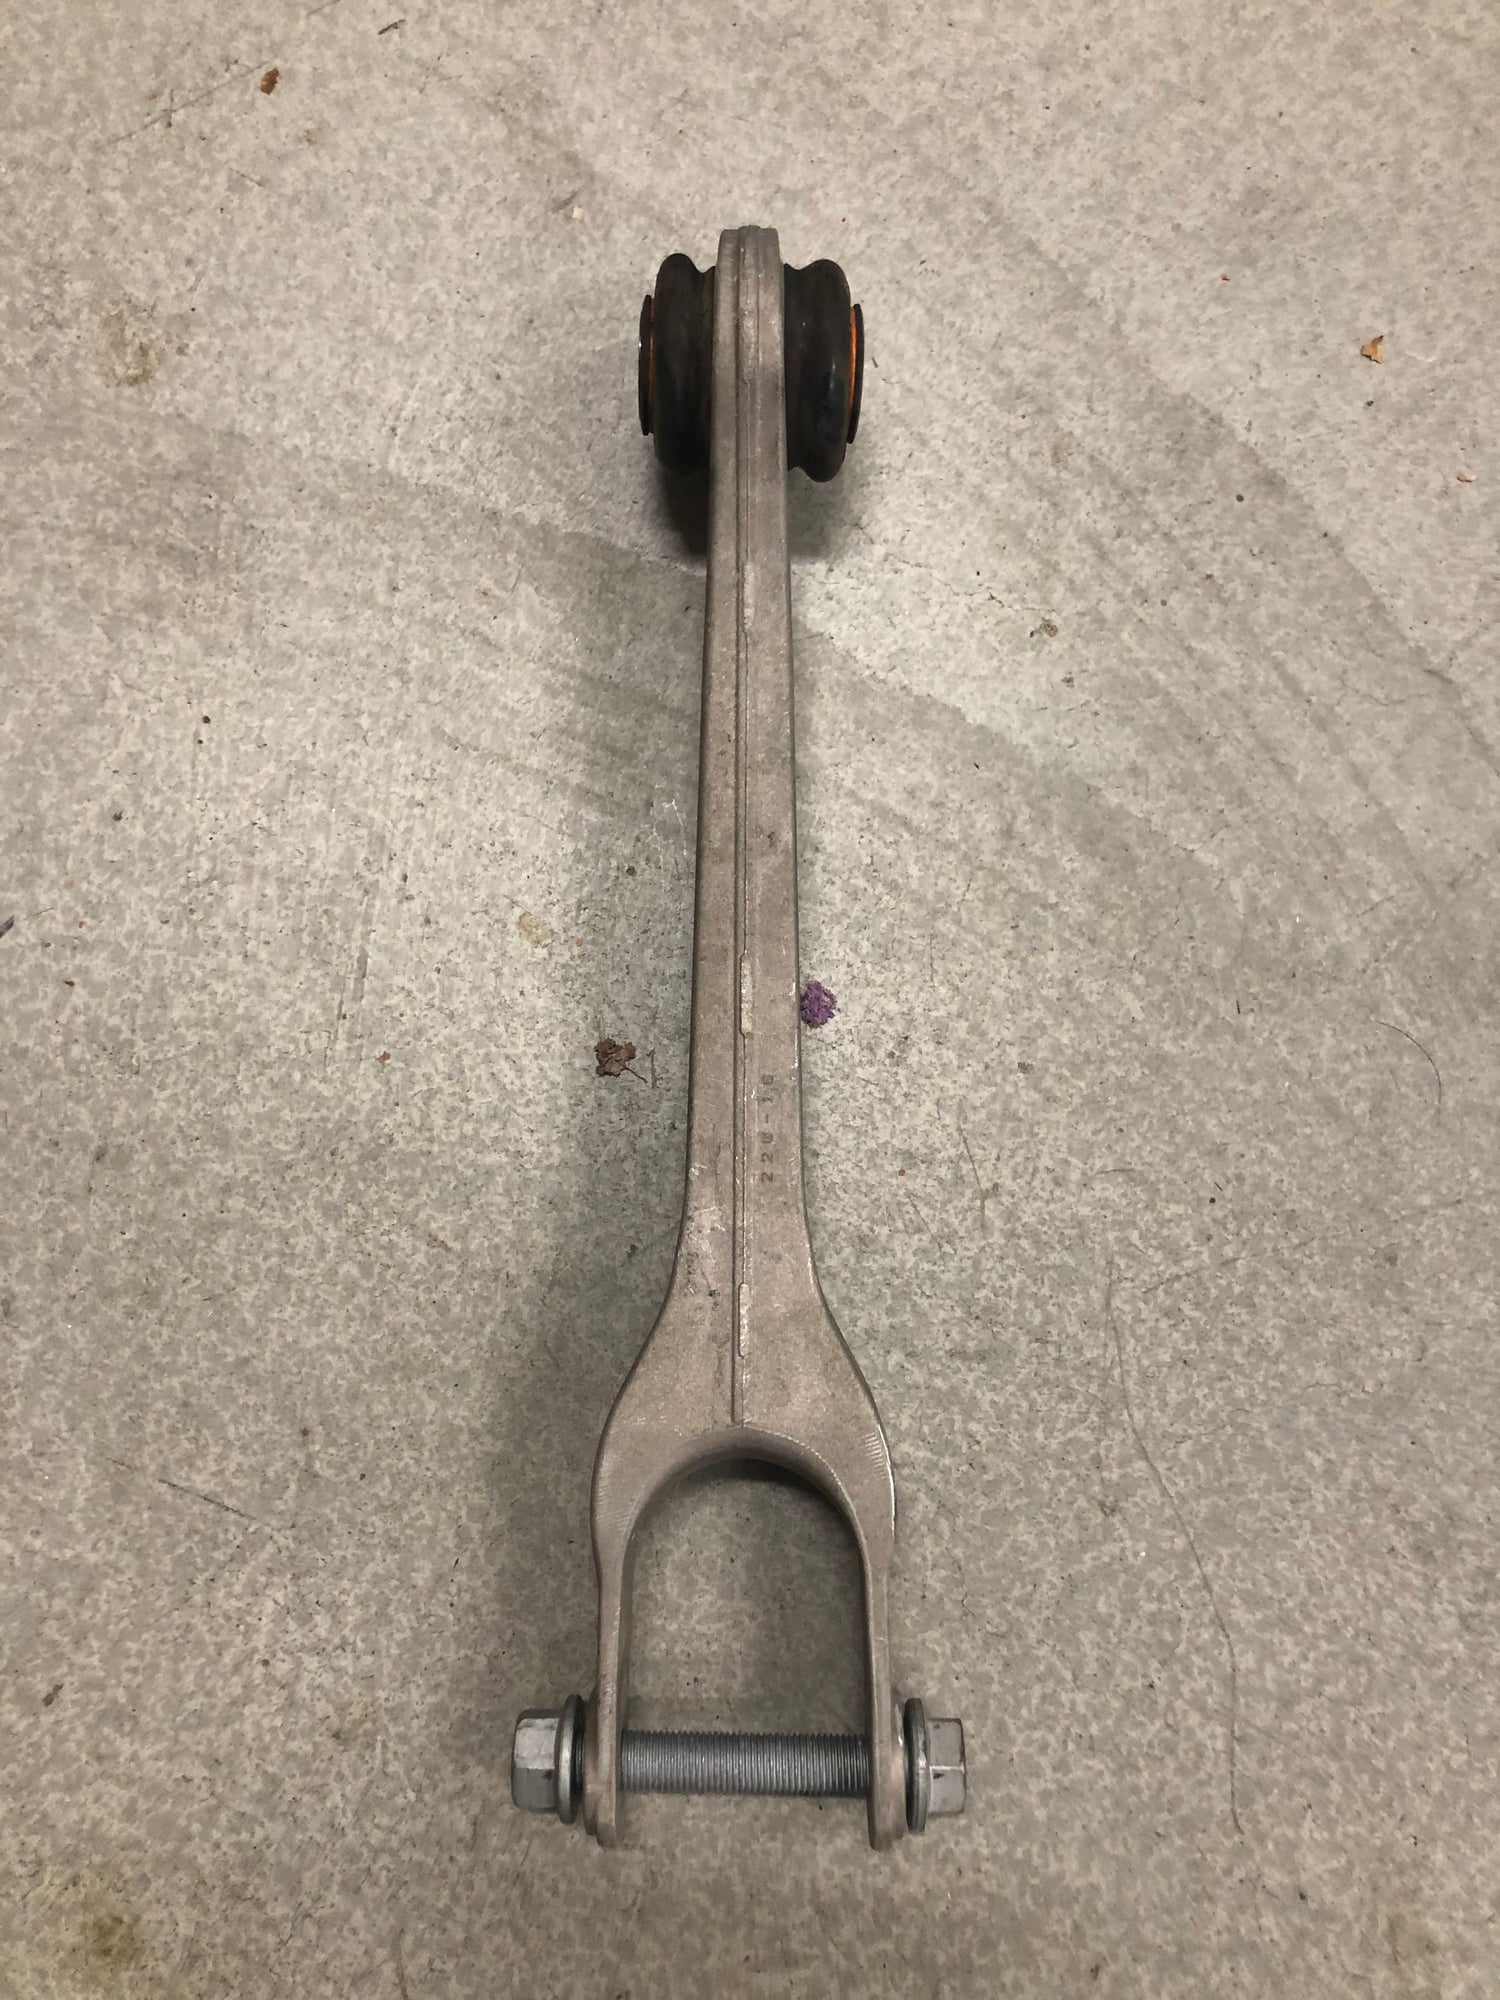 2018 Porsche GT3 - GT3 complete lower control arm with 5mm shim and thrust arm - Steering/Suspension - $500 - Irvine, CA 92620, United States